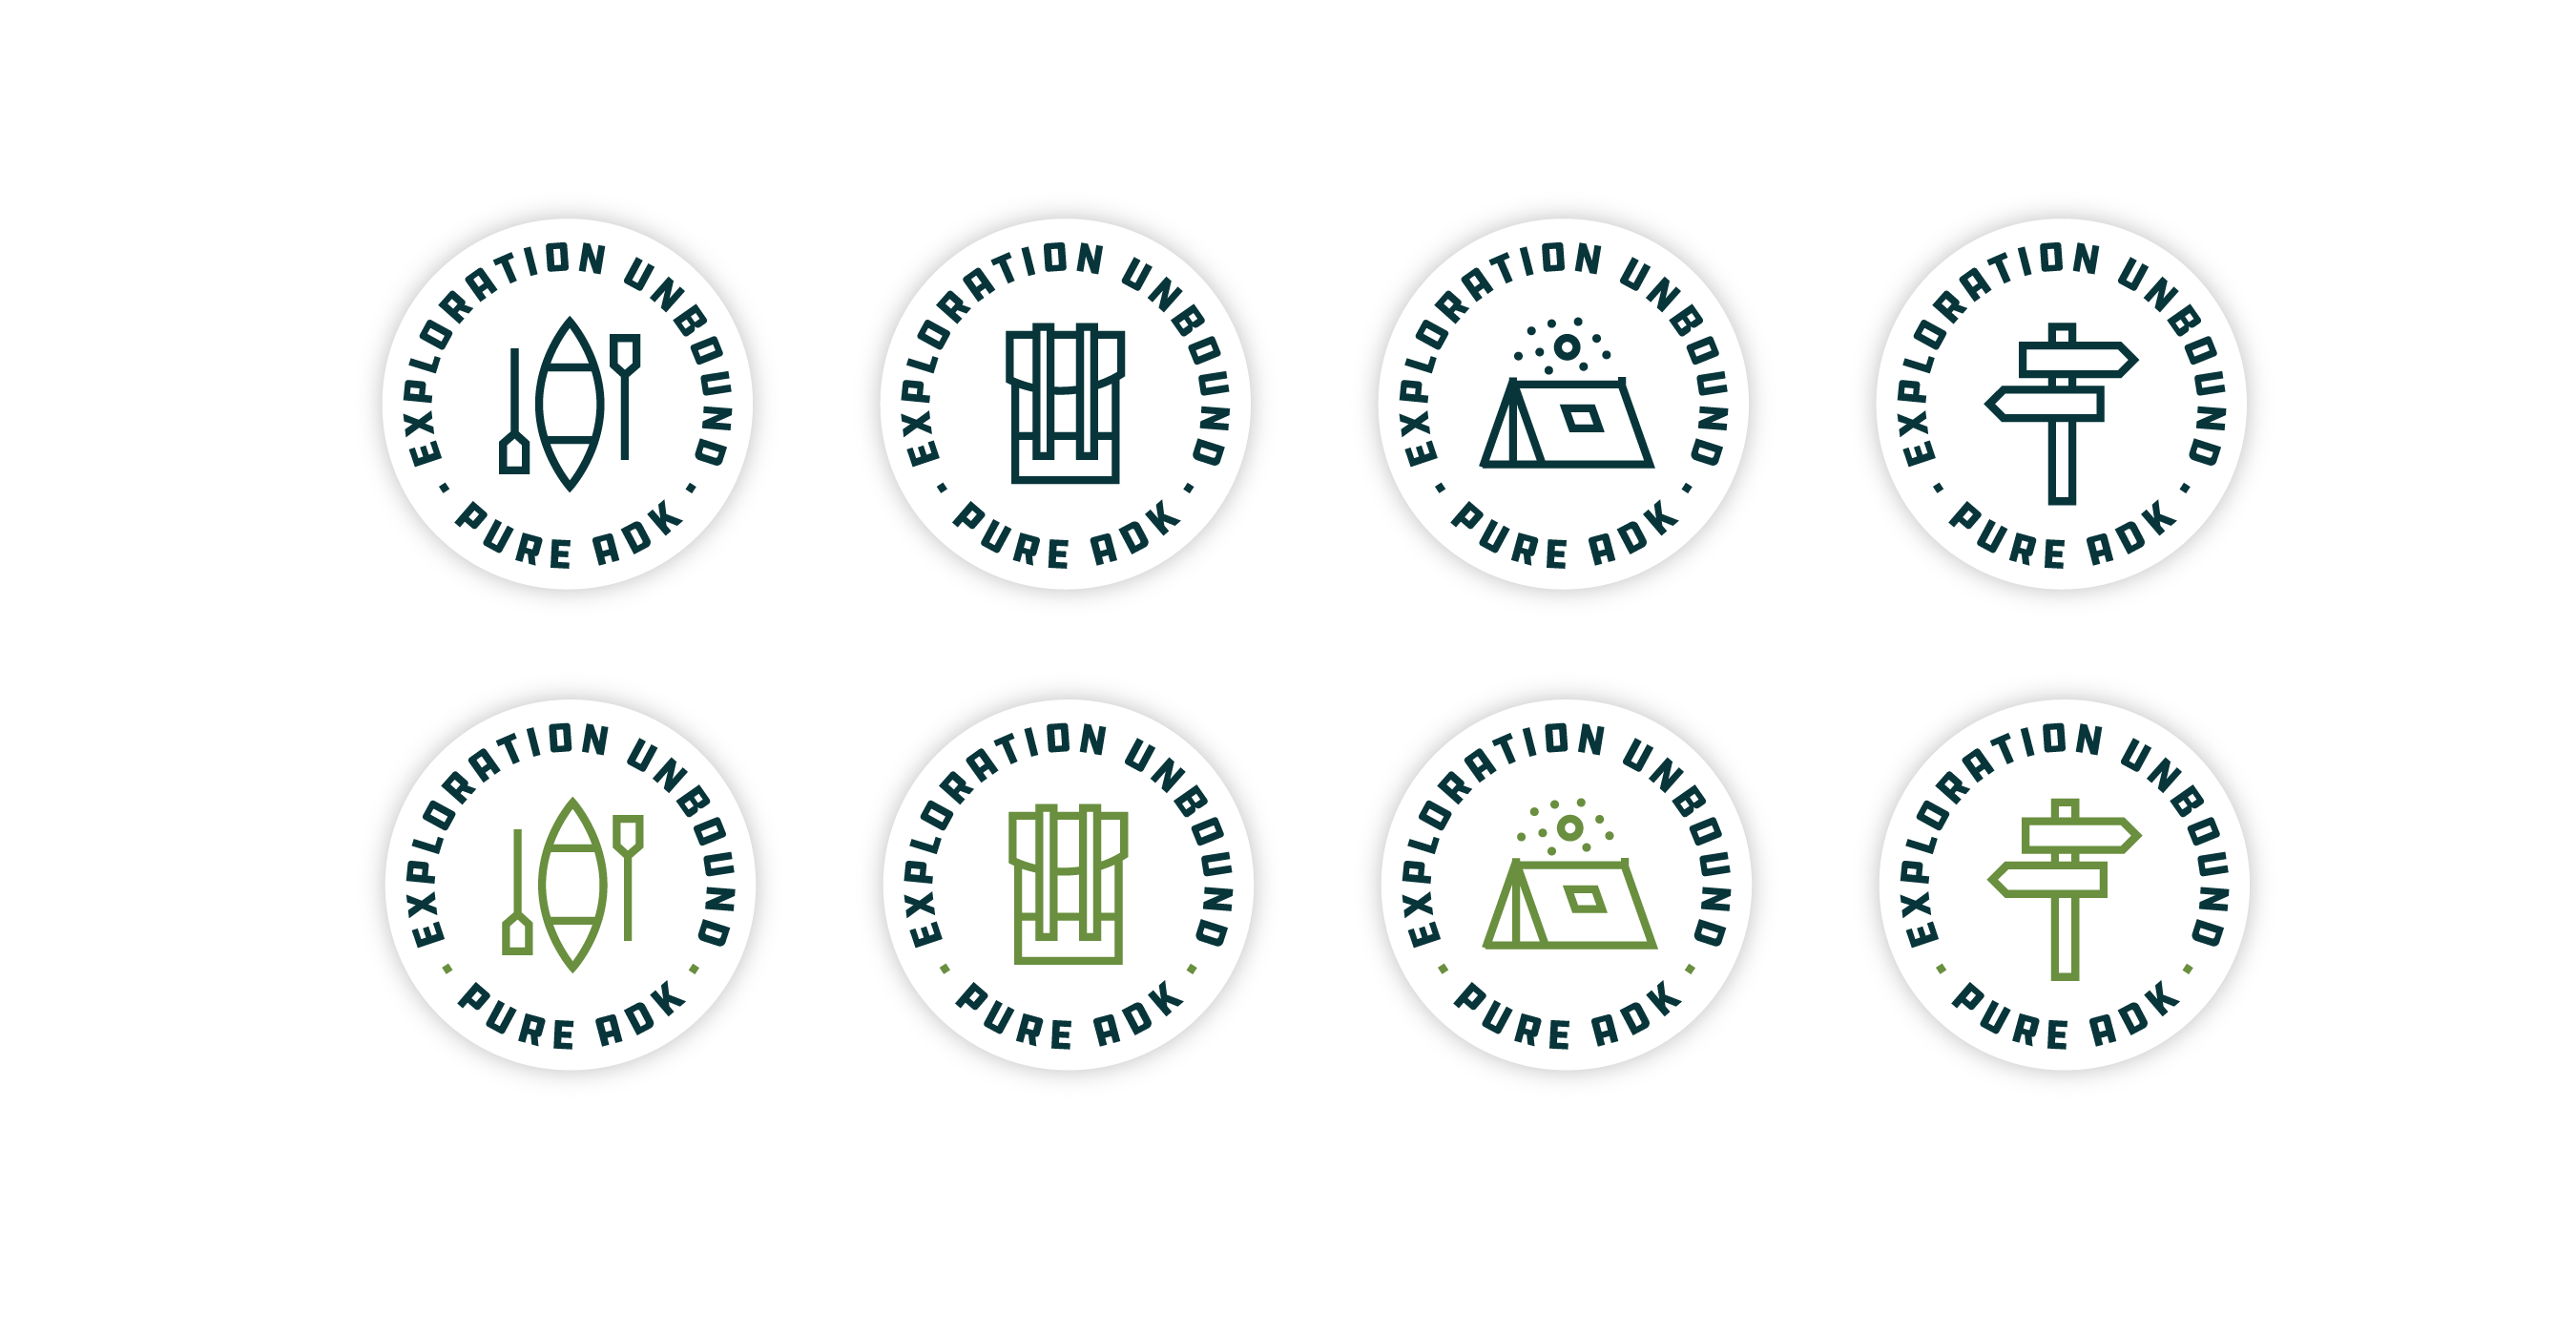 A series of eight camping-inspired stickers in circular lockup. They each display a canoe and paddles, a hiking pack, a tent, a trail marker.